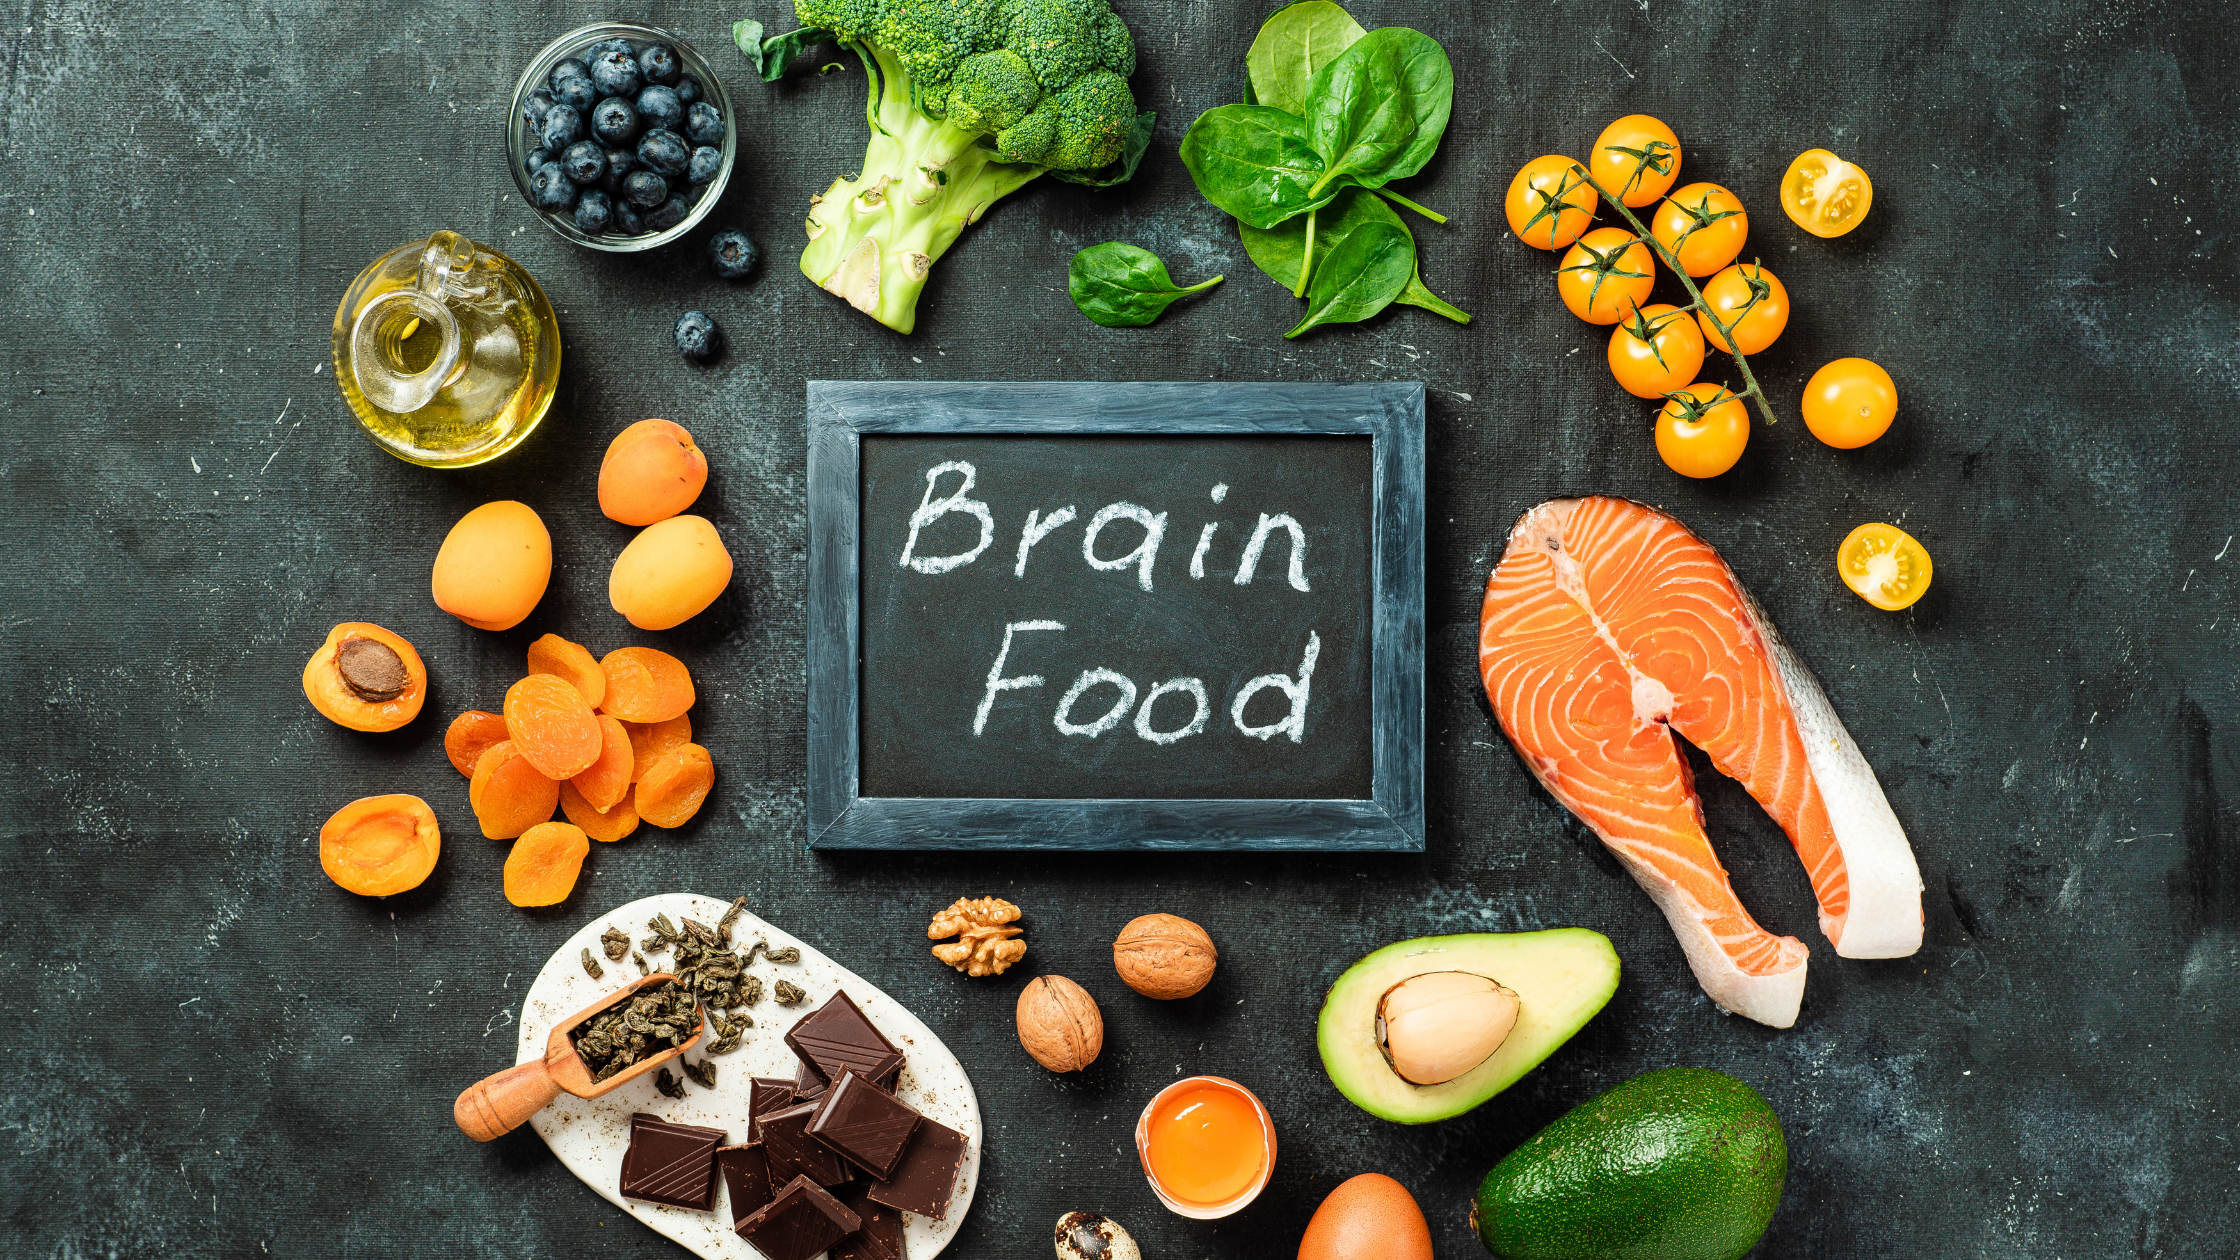 blackboard saying "brain food" surrounded by produce and fish